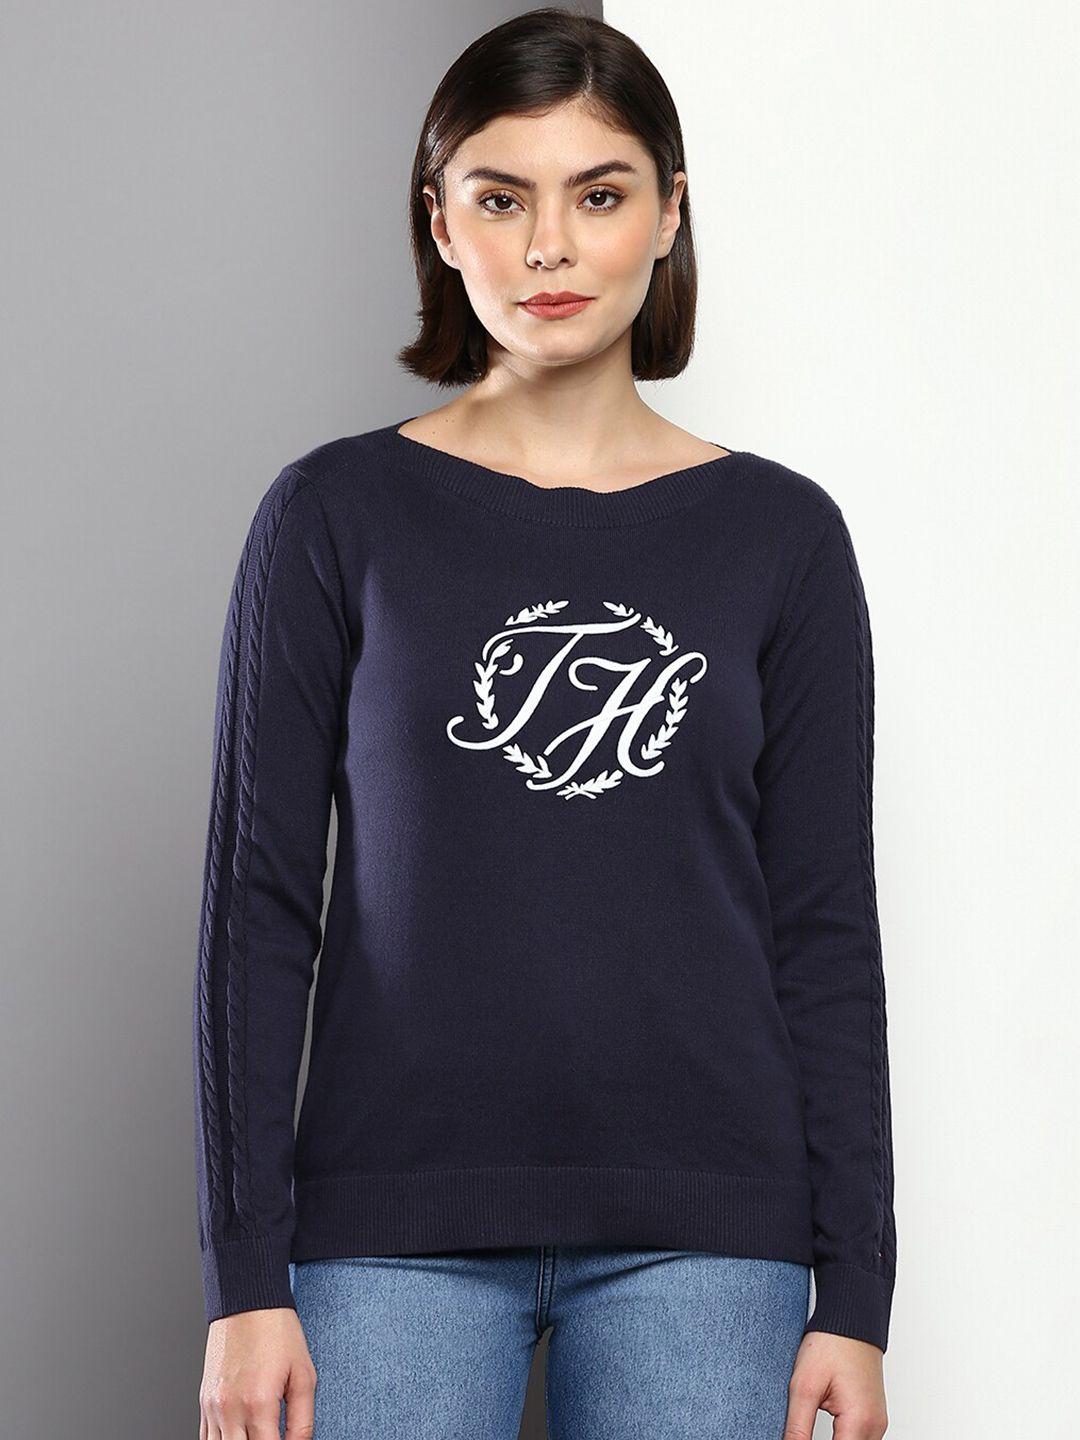 tommy hilfiger women navy blue & white embroidered pure cotton pullover